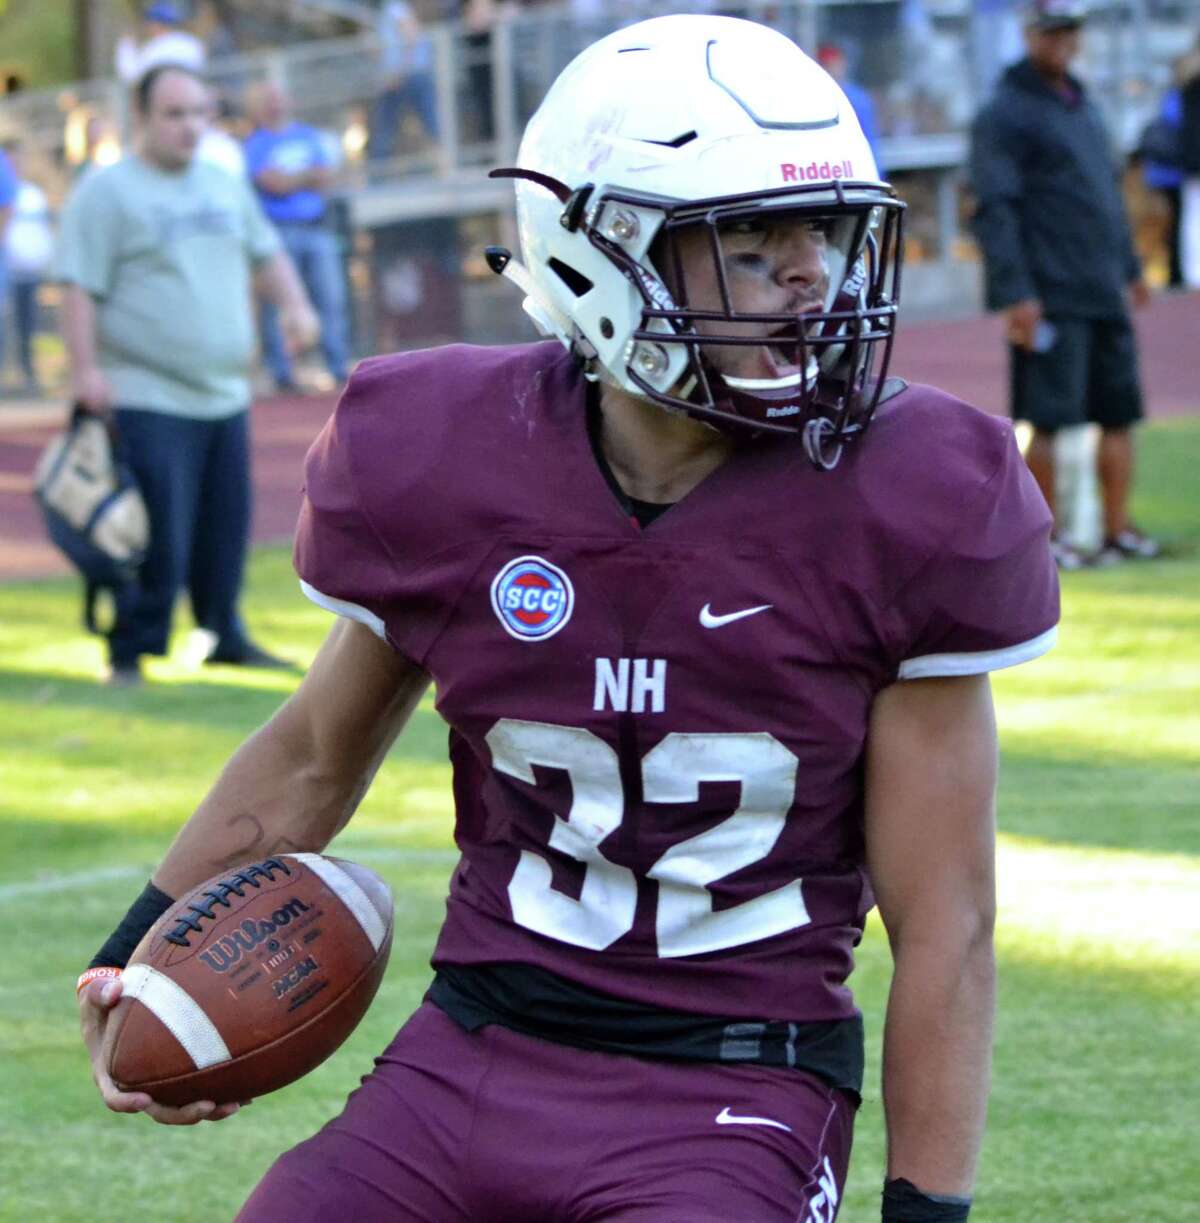 North Haven’s Devan Brockamer celebrates after scoring a two-point conversion during the 14th annual Spring Brawl at North Haven High on June 15, 2018.